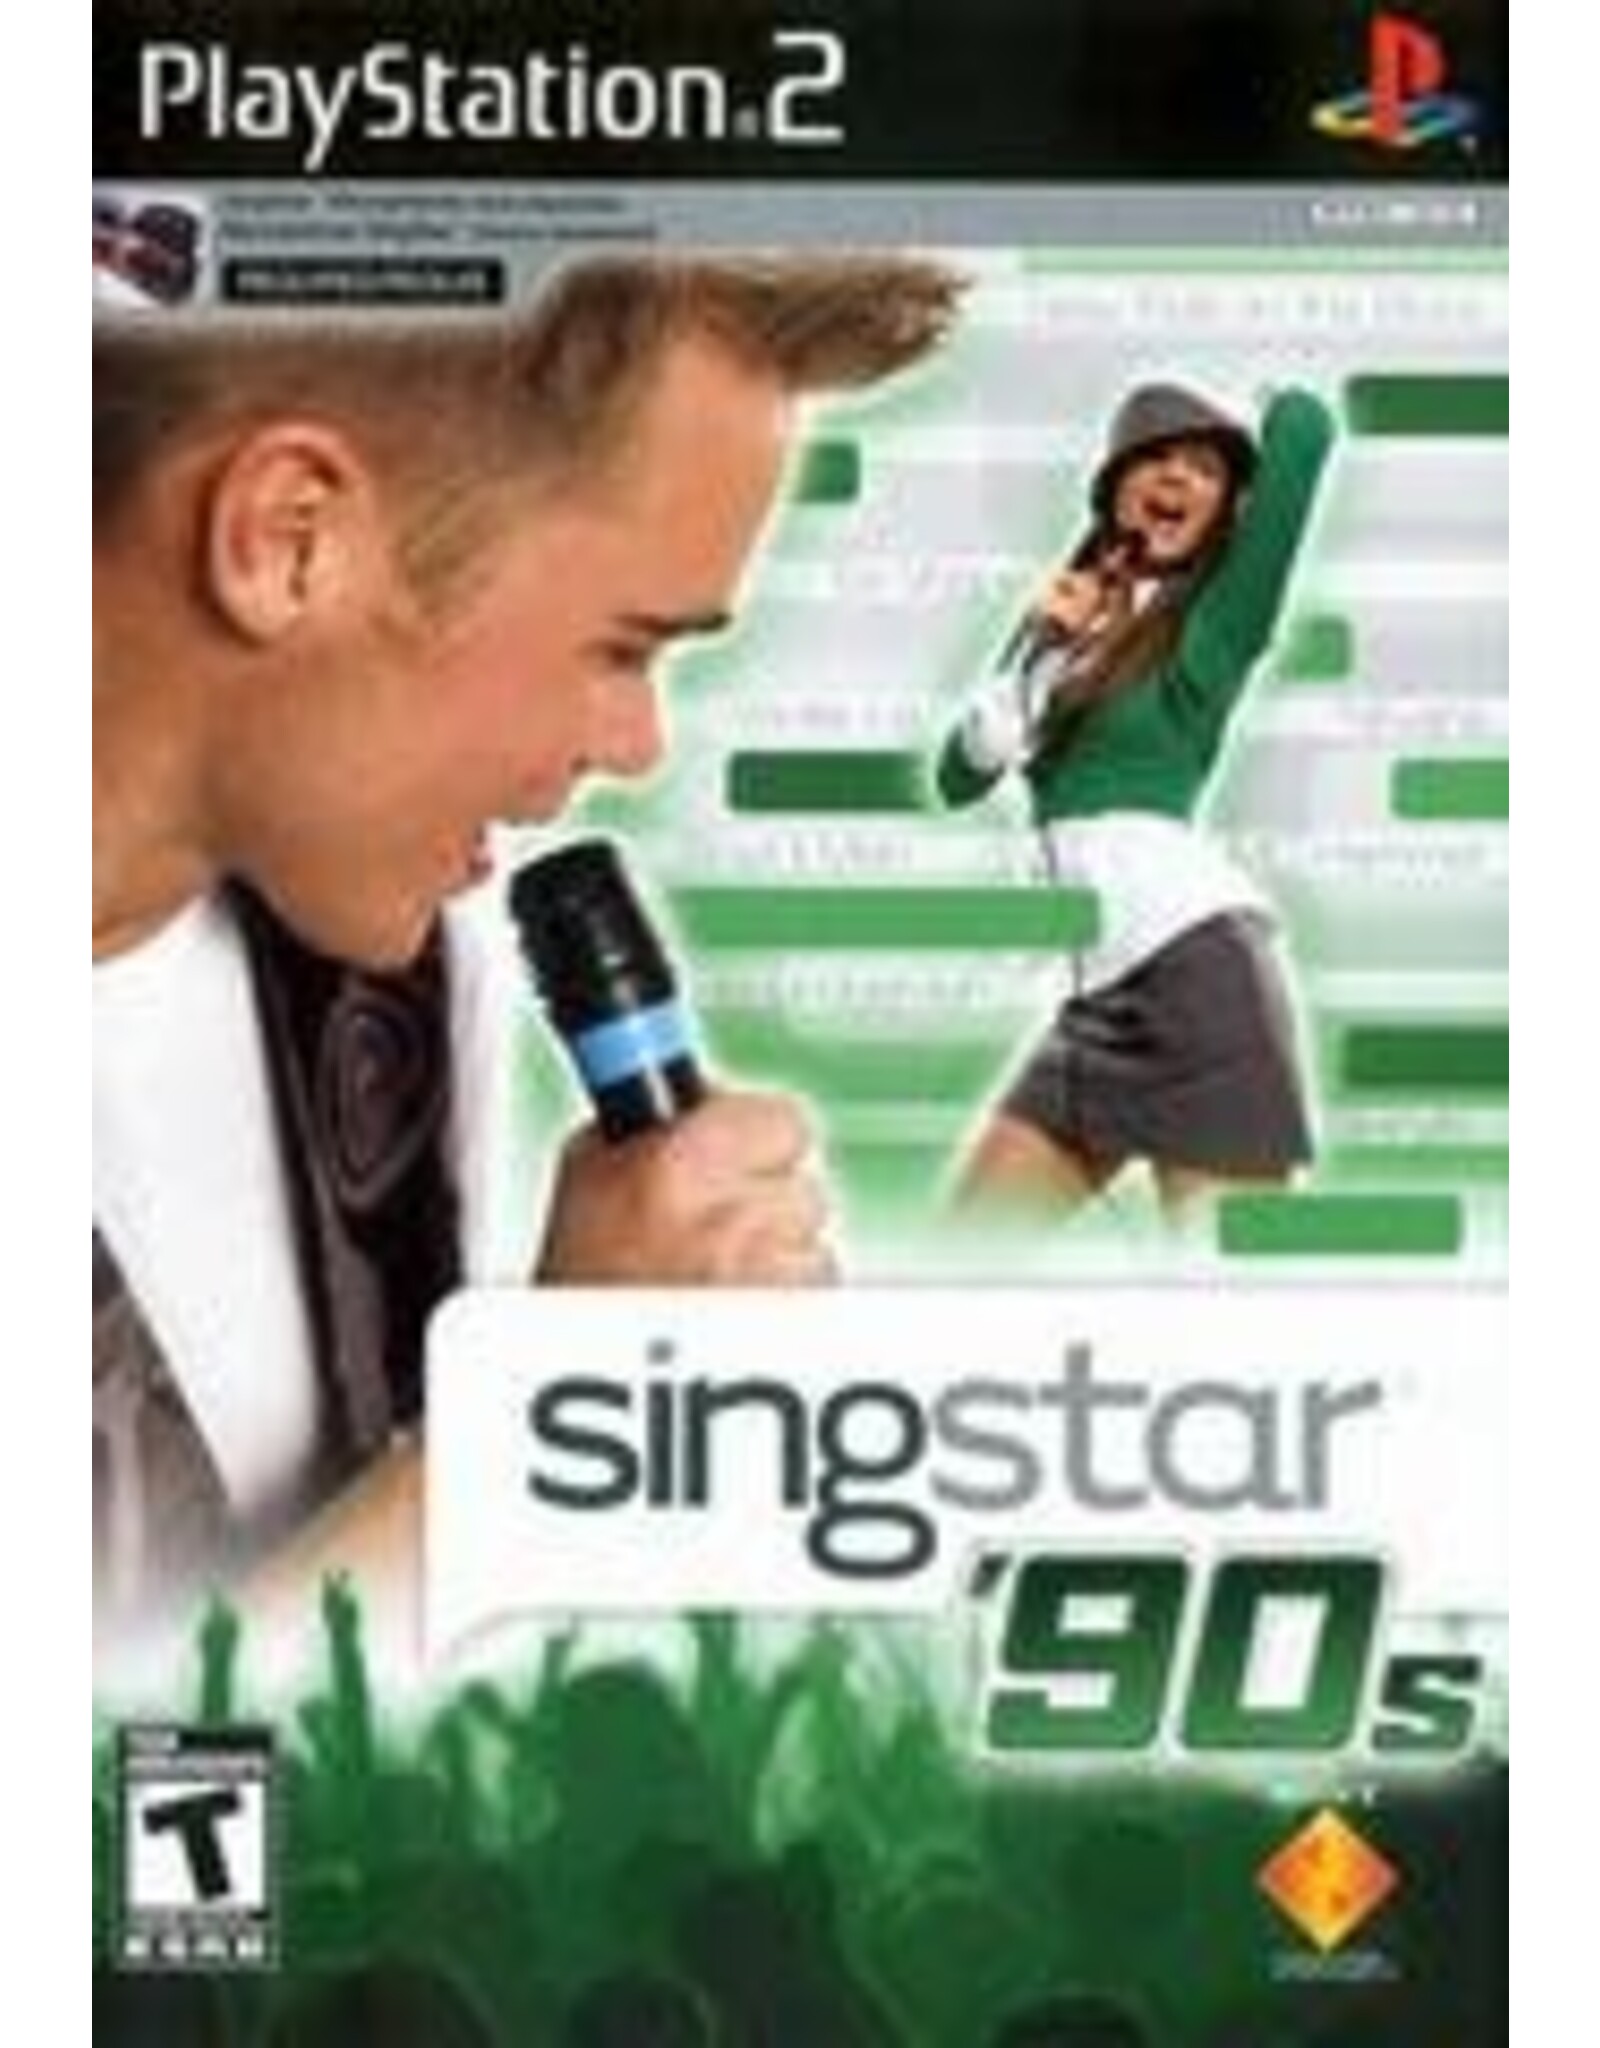 Playstation 2 Singstar 90's (CiB, Game Only)